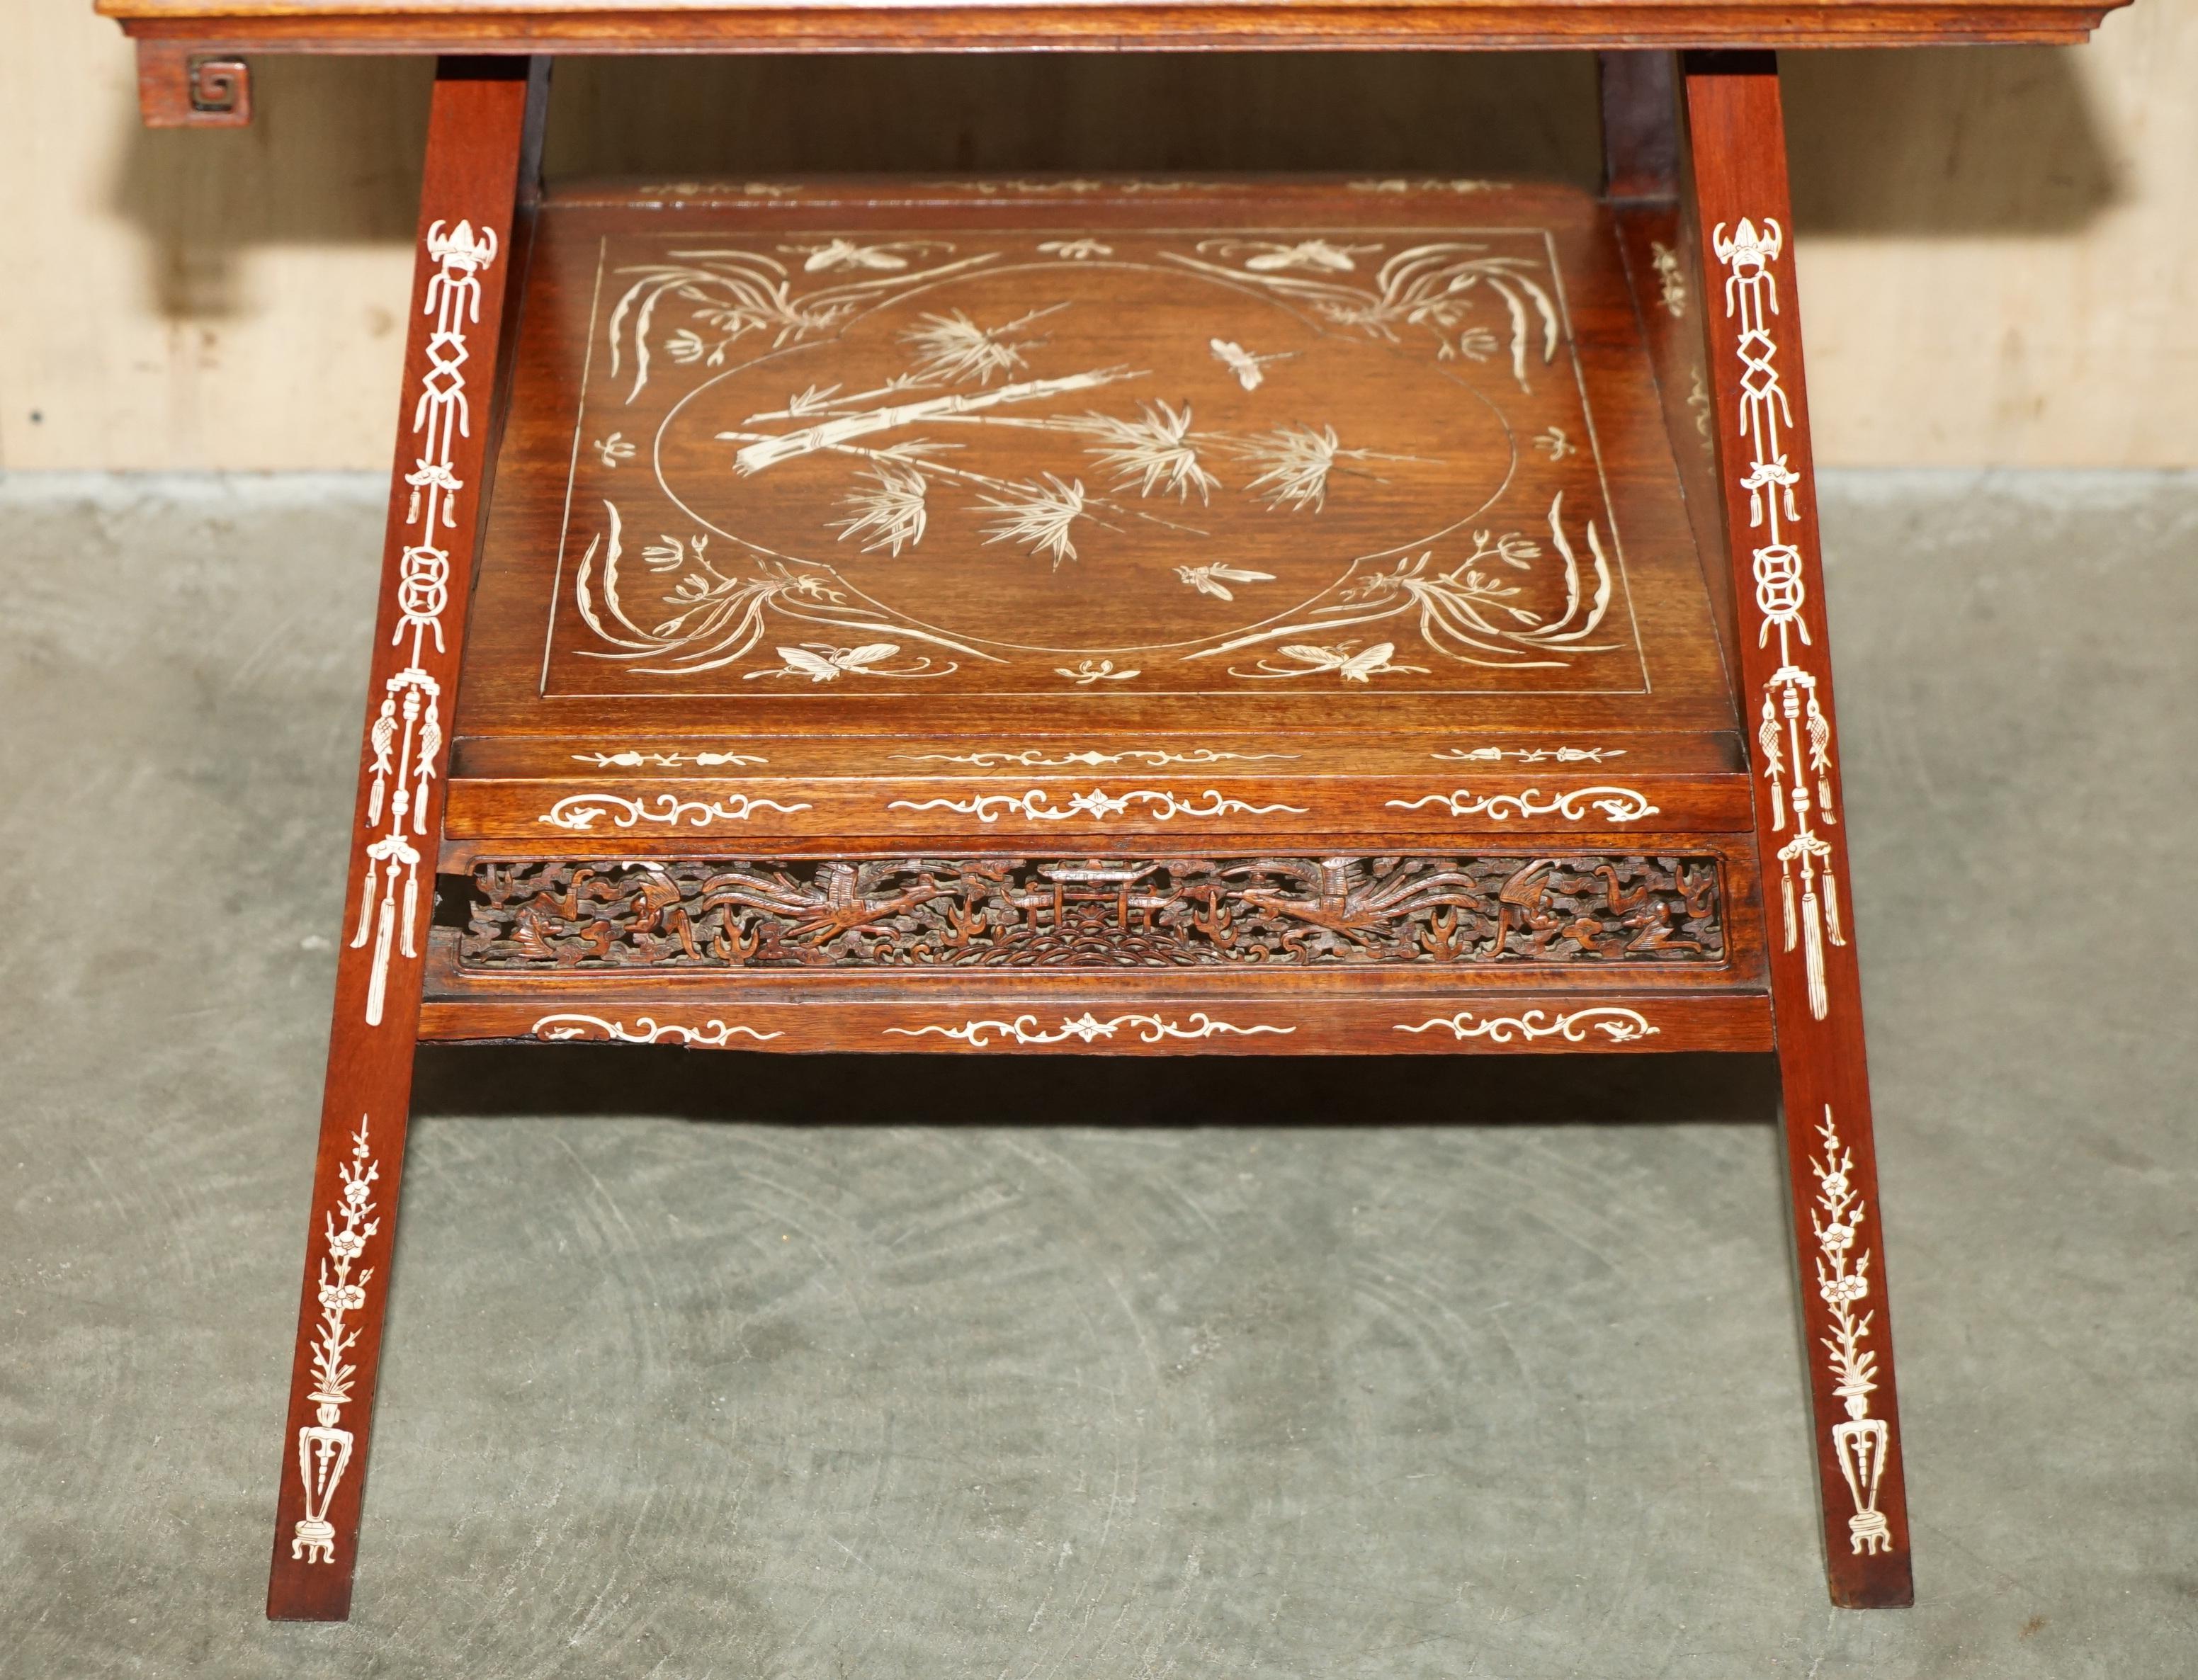 ANTIQUE CIRCA 1900 ORNATELY CARVED AND HEAViLY INLAID CHINESE OCCASIONAL TABLE For Sale 8